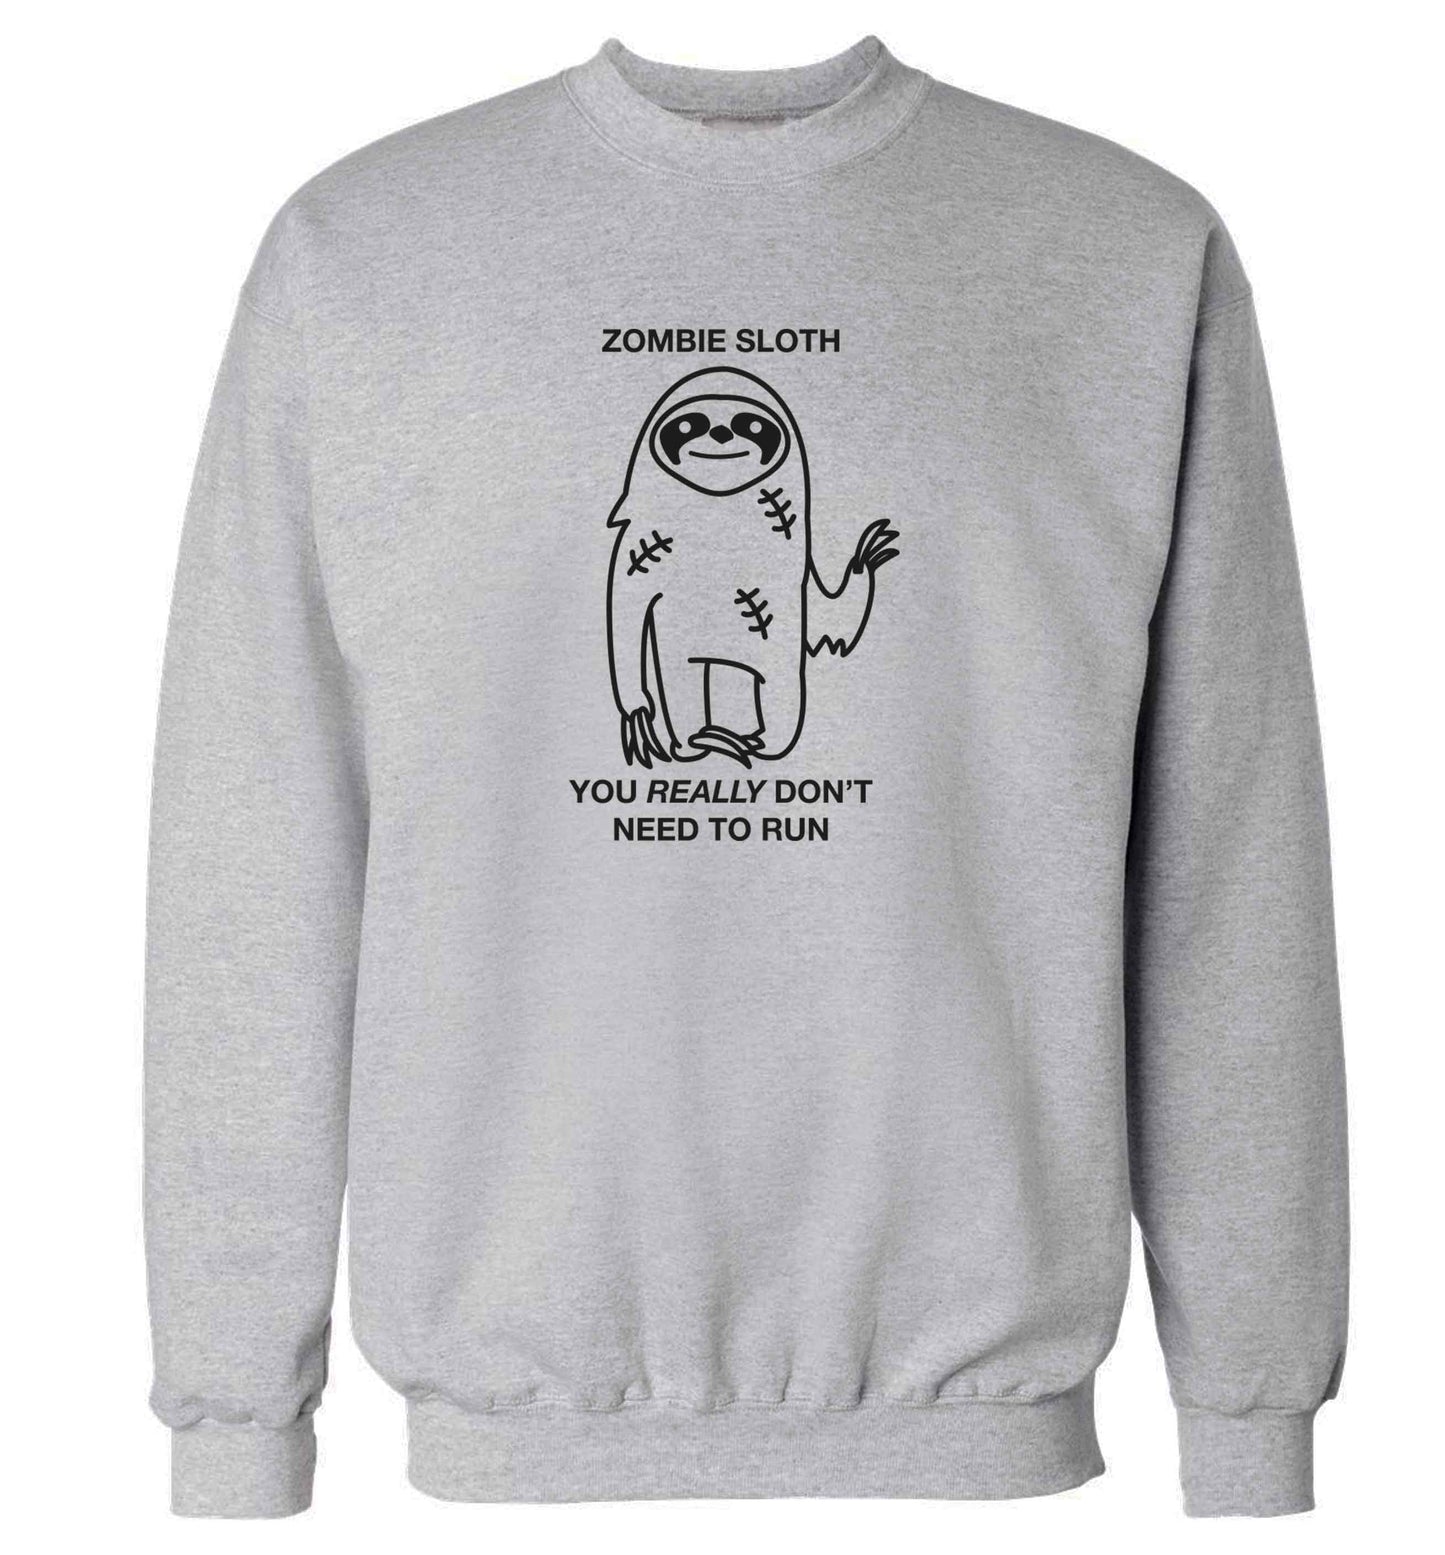 Zombie sloth you really don't need to run adult's unisex grey sweater 2XL